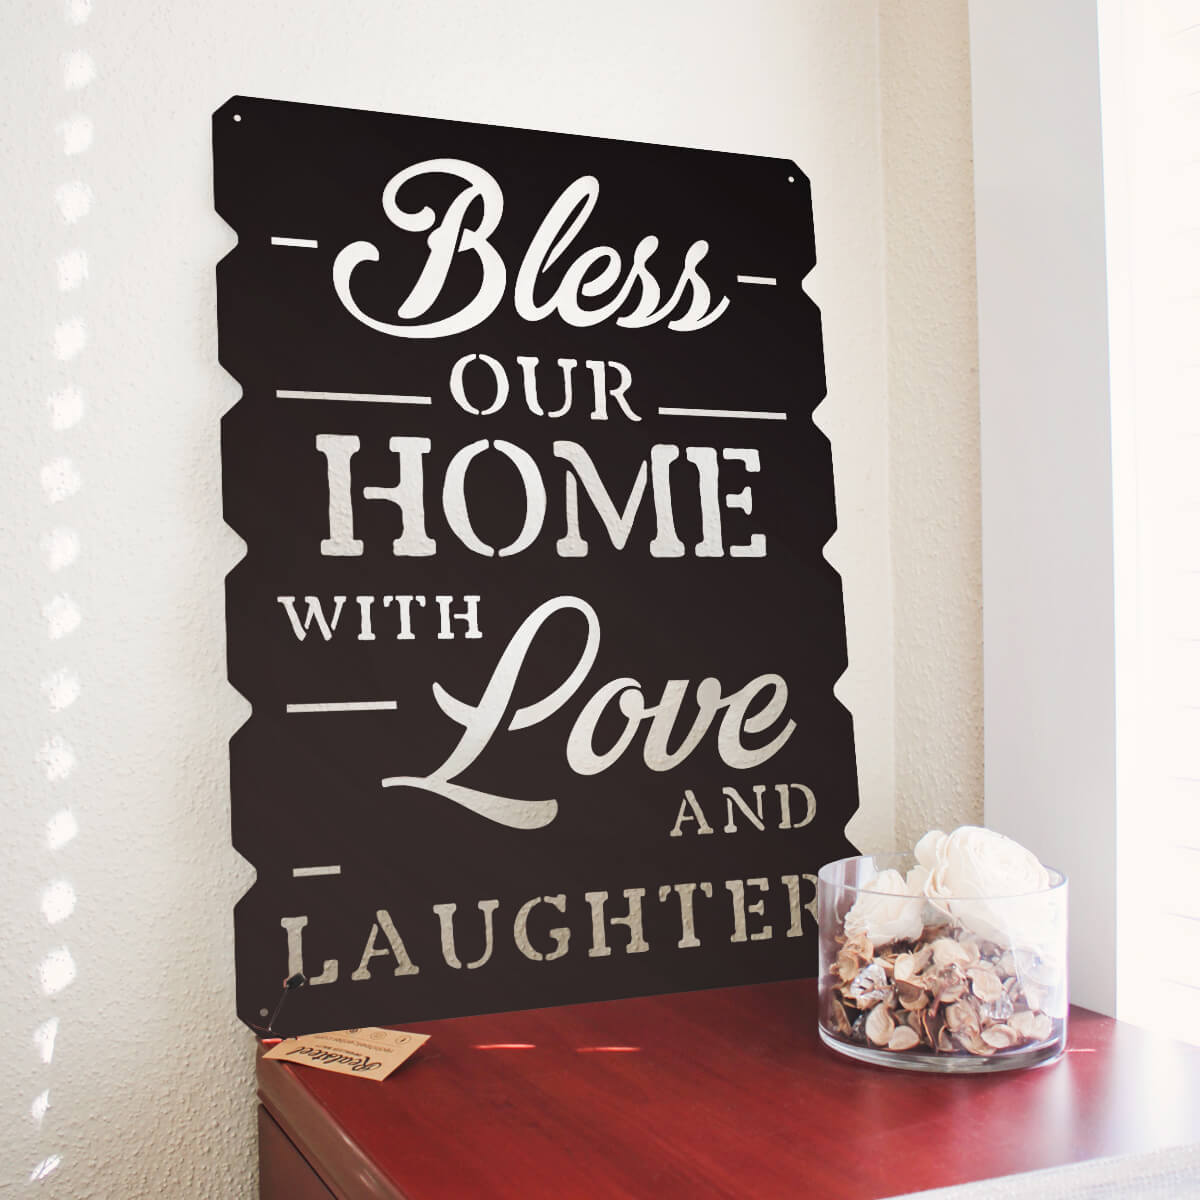 Bless Our Home Wall Art - Black - 18x24